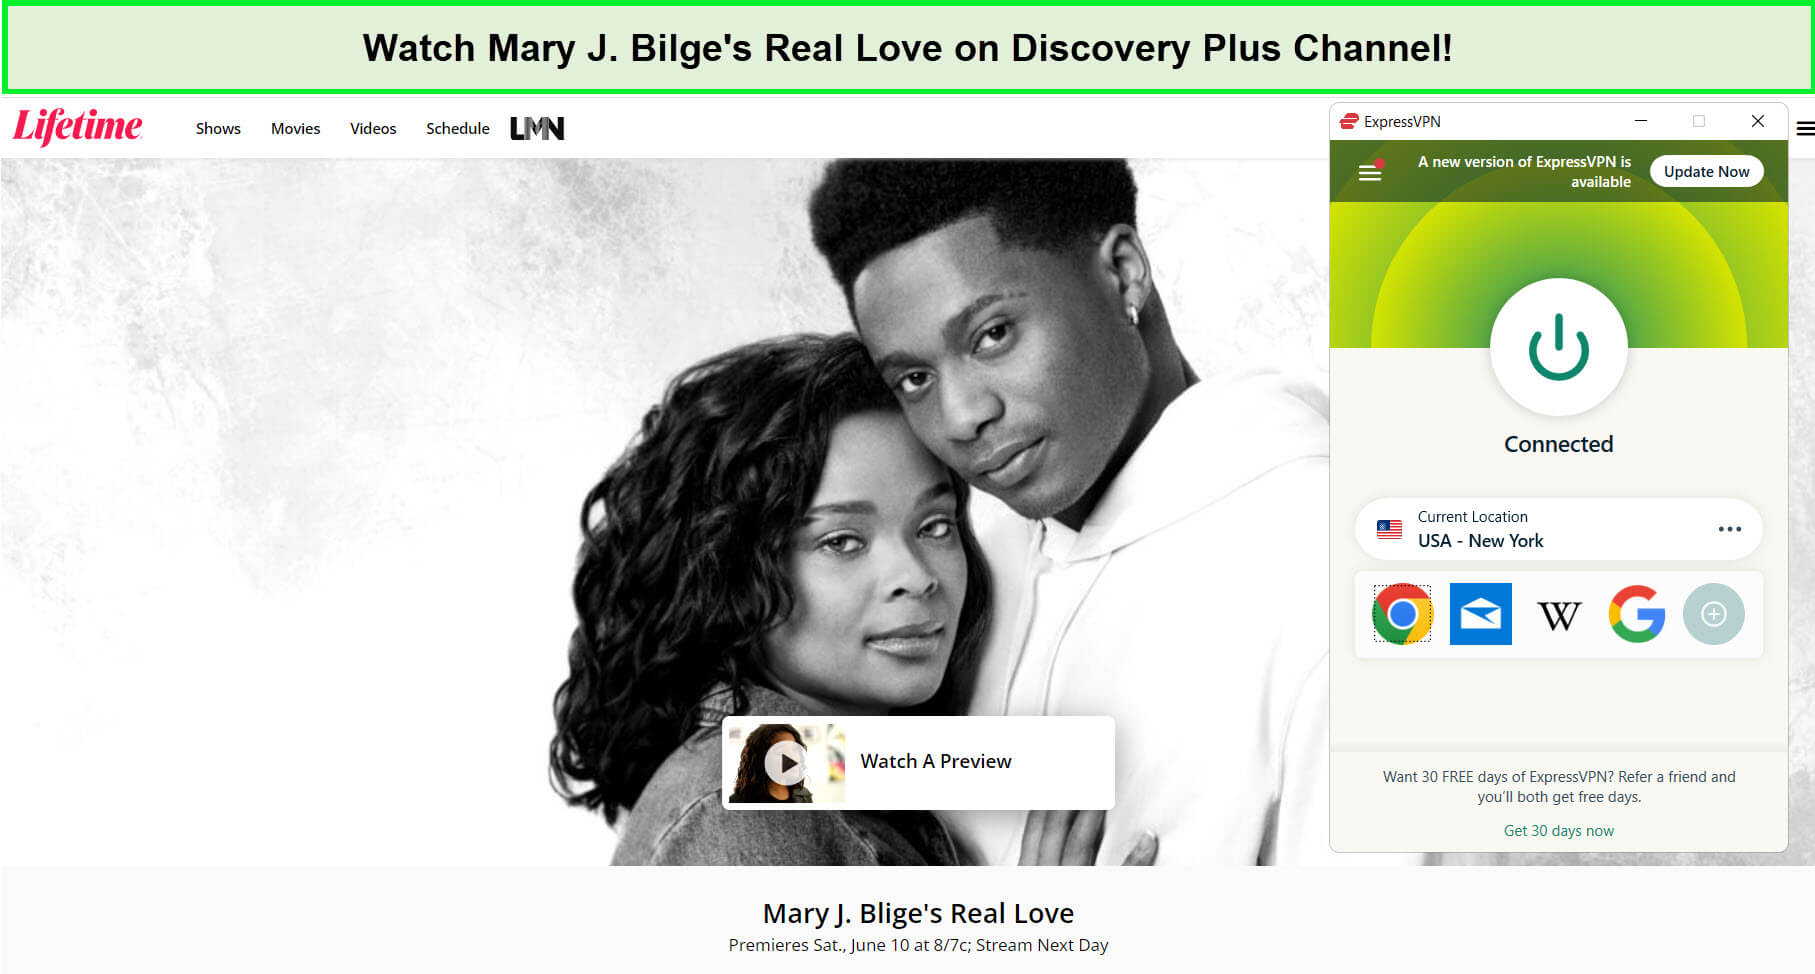 watch-mary-j-bilge-real-love-on-discovery-plus